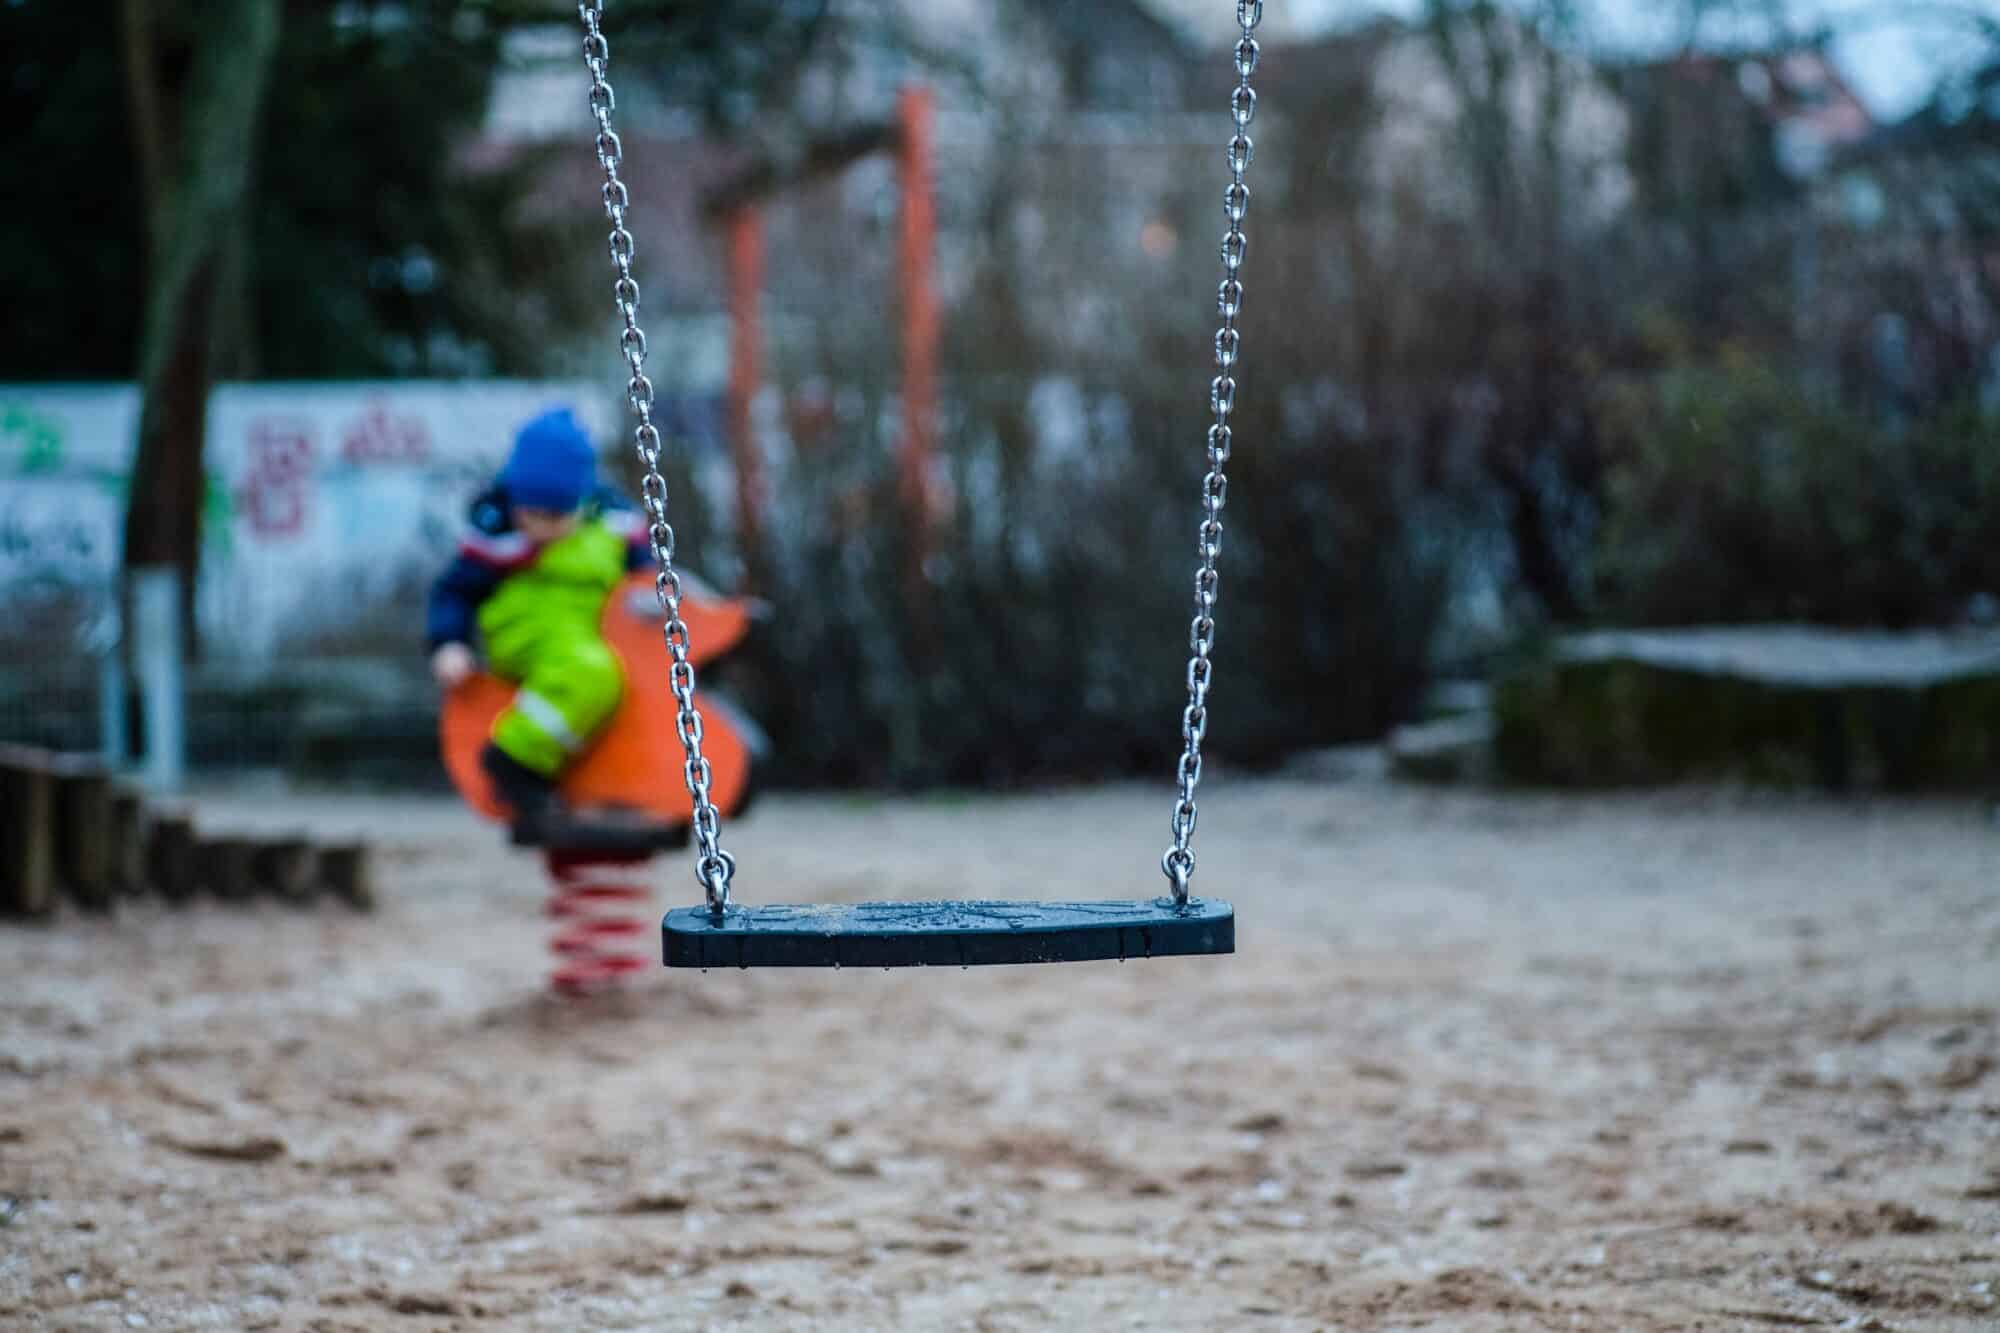 An empty swing in a child's playground.